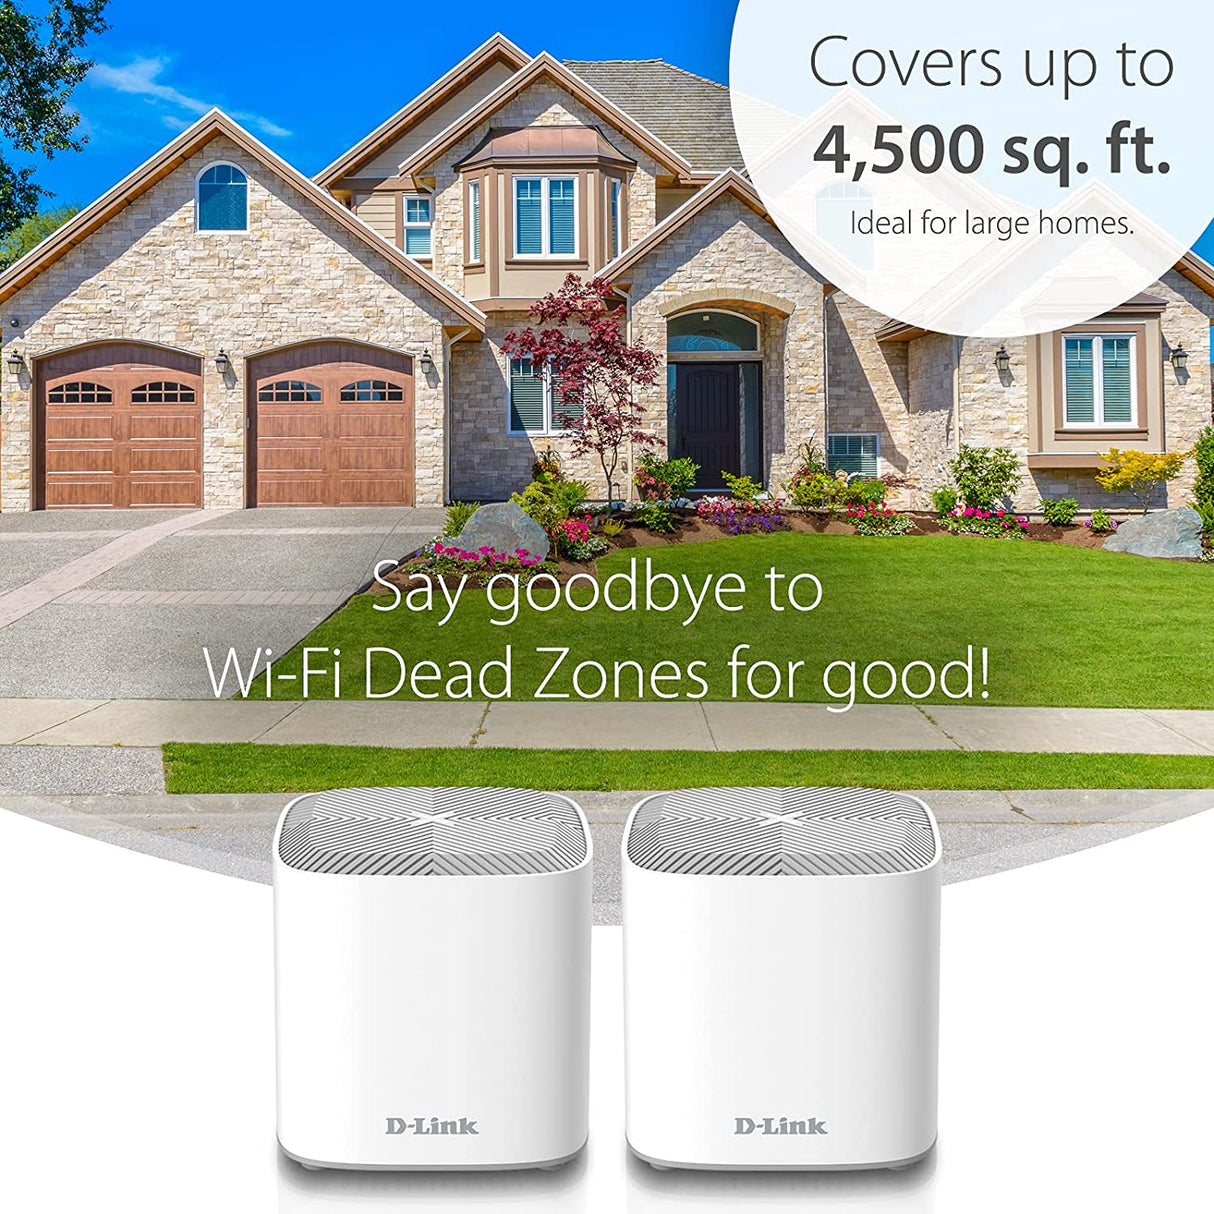 D-Link COVR AX1800 Whole Home Mesh Wi-Fi 6 System - Up to 4500 sq.ft. Coverage, Voice Control w/Amazon Alexa and Google Assistant, Enhanced Parental Controls, 2-Pack (COVR-X1862) WiFi 6 AX1800 Mesh Kit 2pk